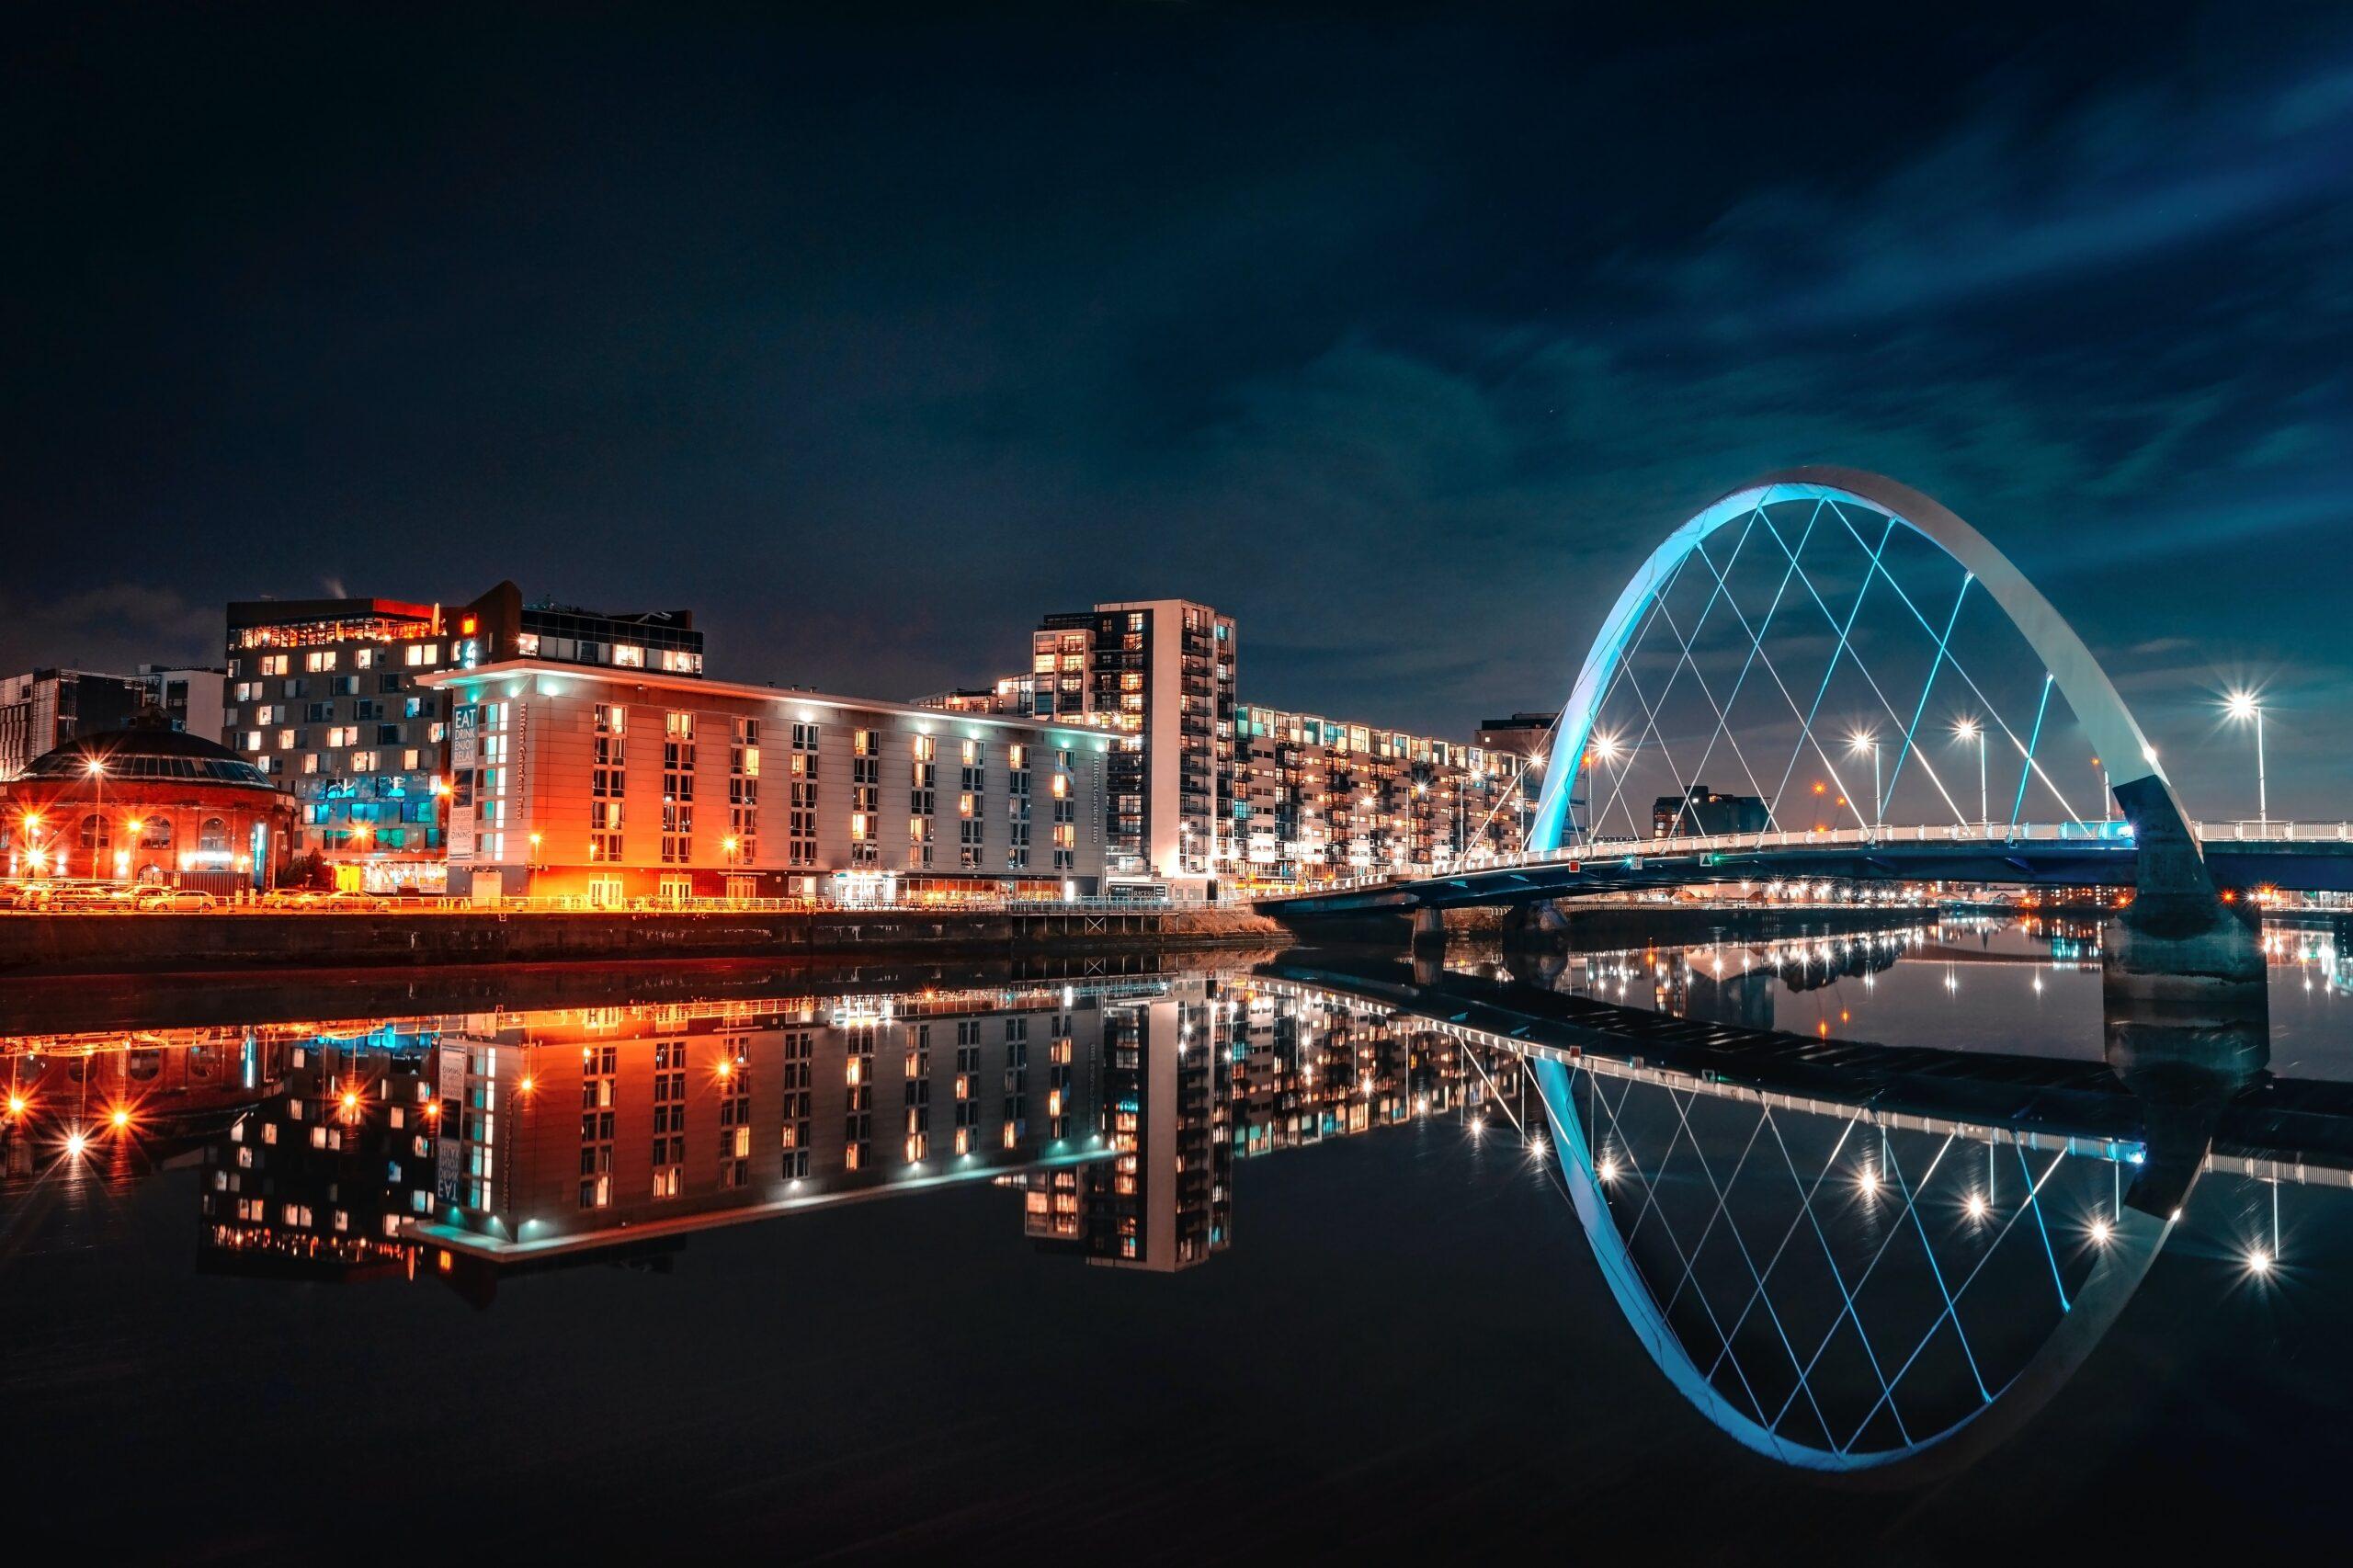 Glasglow Clyde Arc Bridge at night with lights